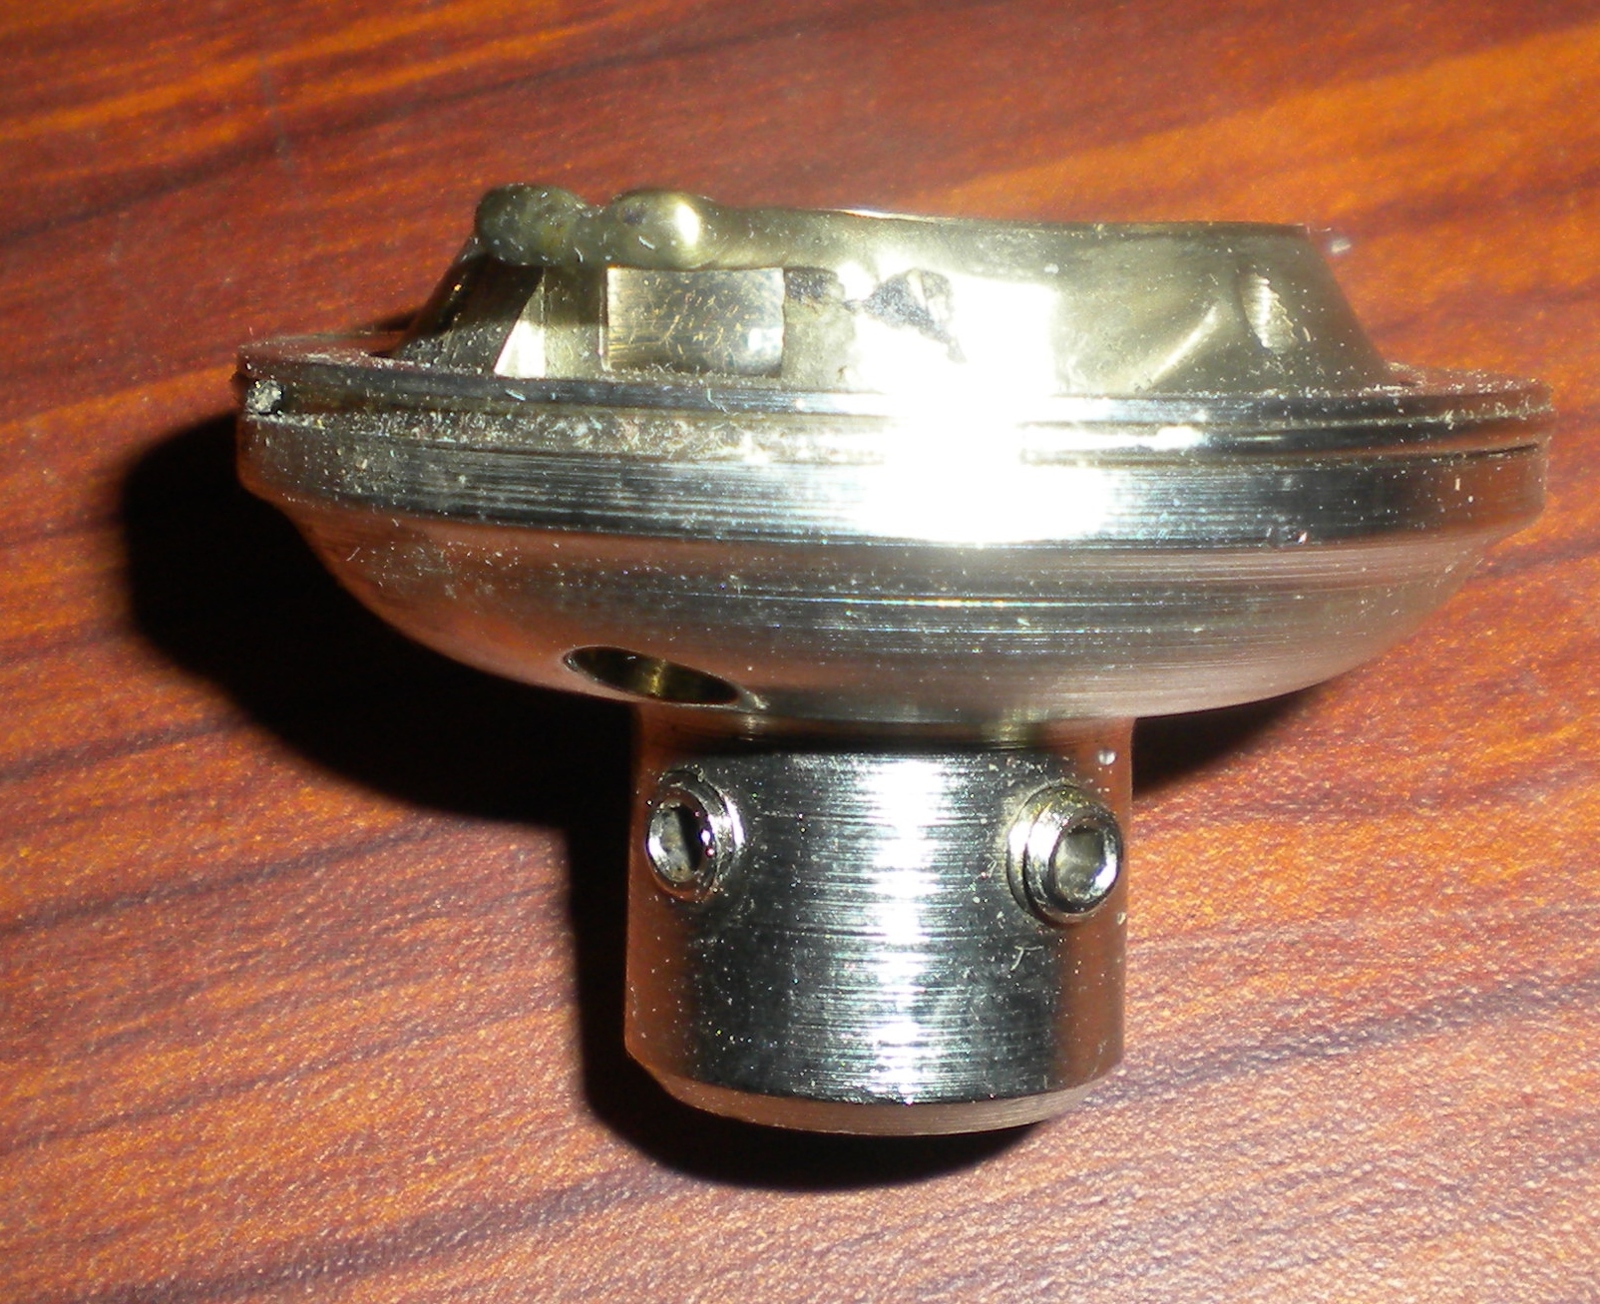 Sears 120.76 Rotary Shuttle Assembly #3437 Dirty But Working w/Set Screws - $20.00